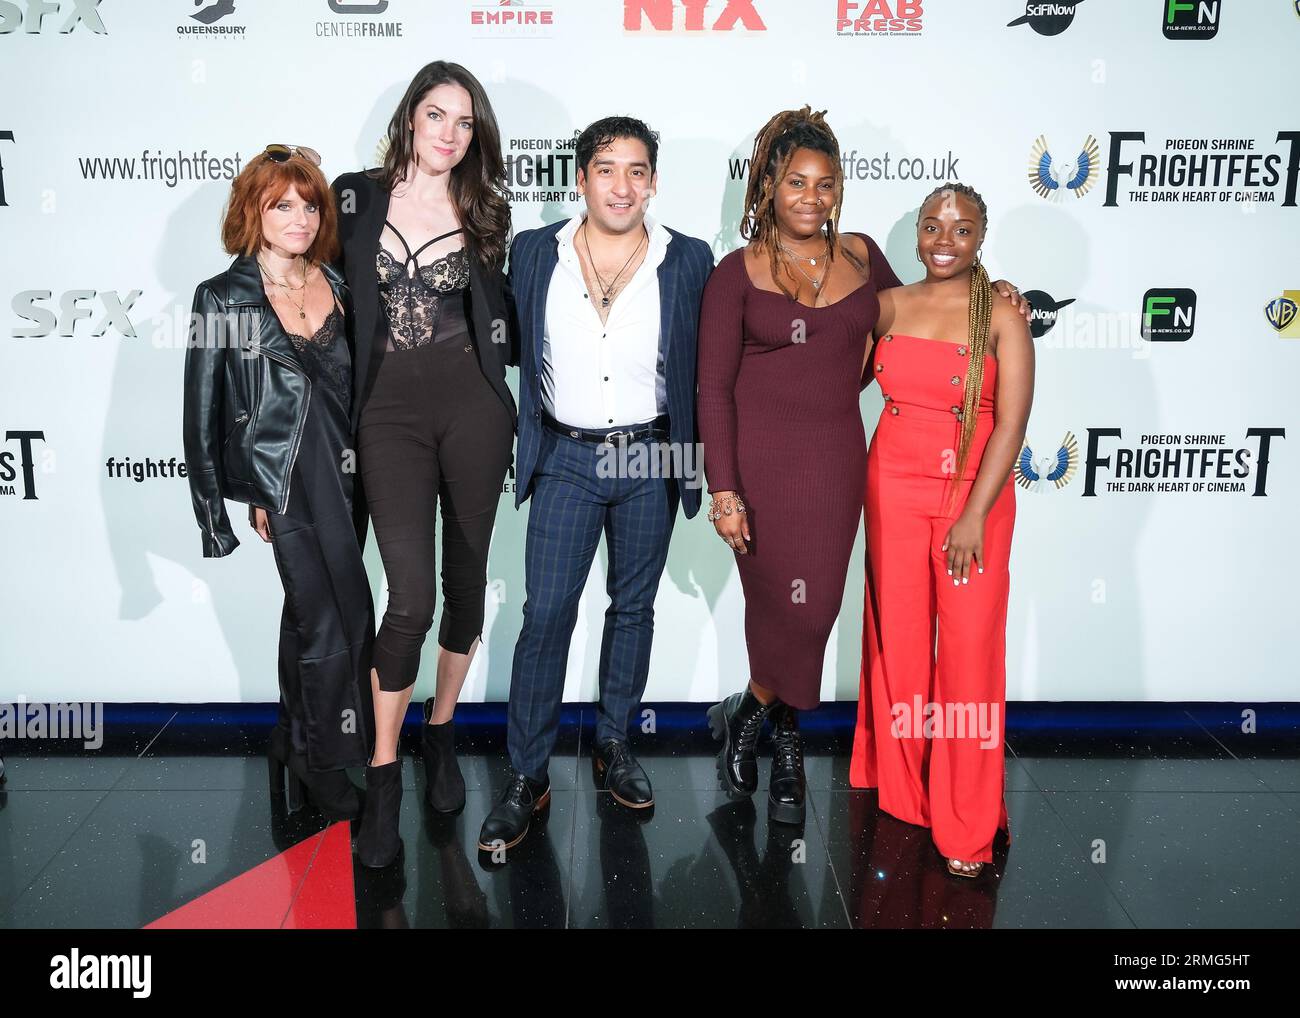 London, UK. 28th Aug, 2023. Kelly Parker, Clare Cooney, Jose Nateras, Ireon Roach and Dashawna Wright photographed at the European Premiere of Departing Seniors held during Pigeon Shrine Frightfest 2023 at the Cineworld Leicester Square. Picture by Julie Edwards Credit: JEP Celebrity Photos/Alamy Live News Stock Photo